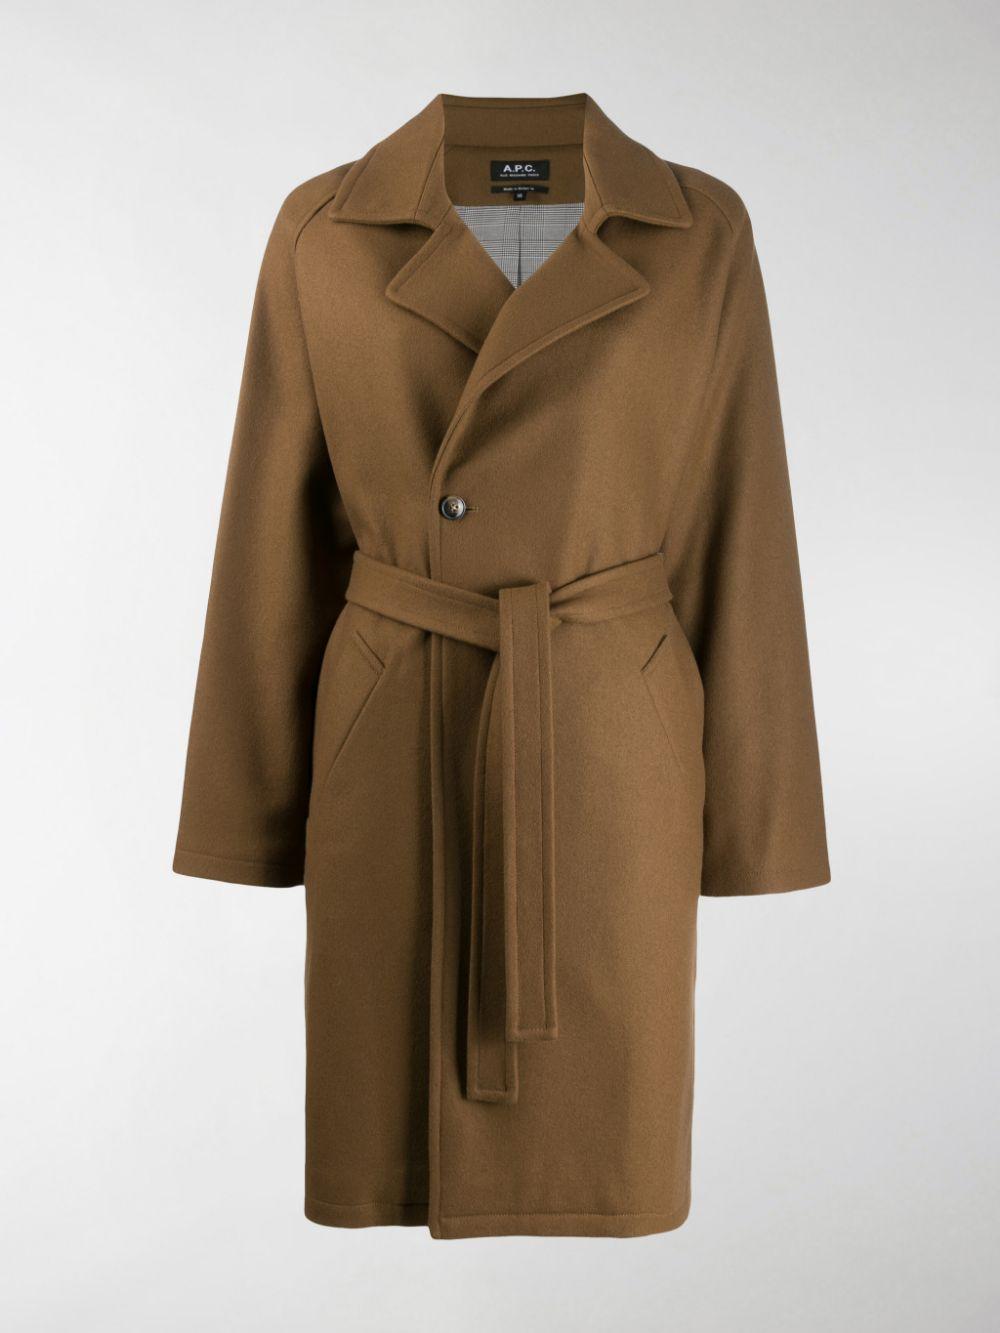 A.P.C. Wool Trench Coat in Brown - Lyst